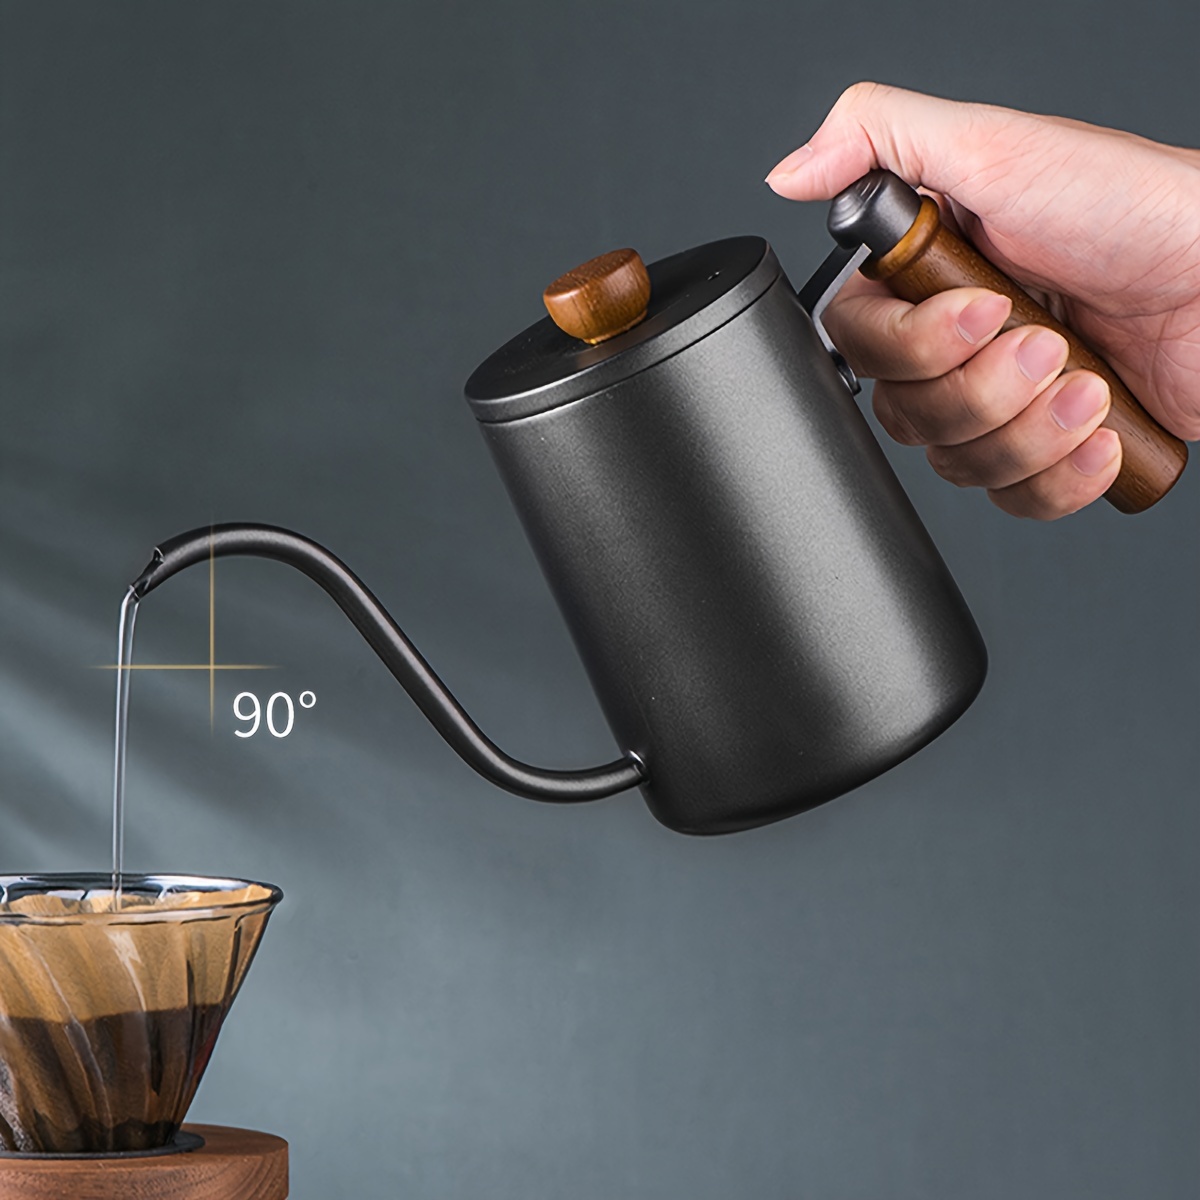 10pcs Pour Over Coffee Maker Set, Coffee Accessories Tools, Coffee